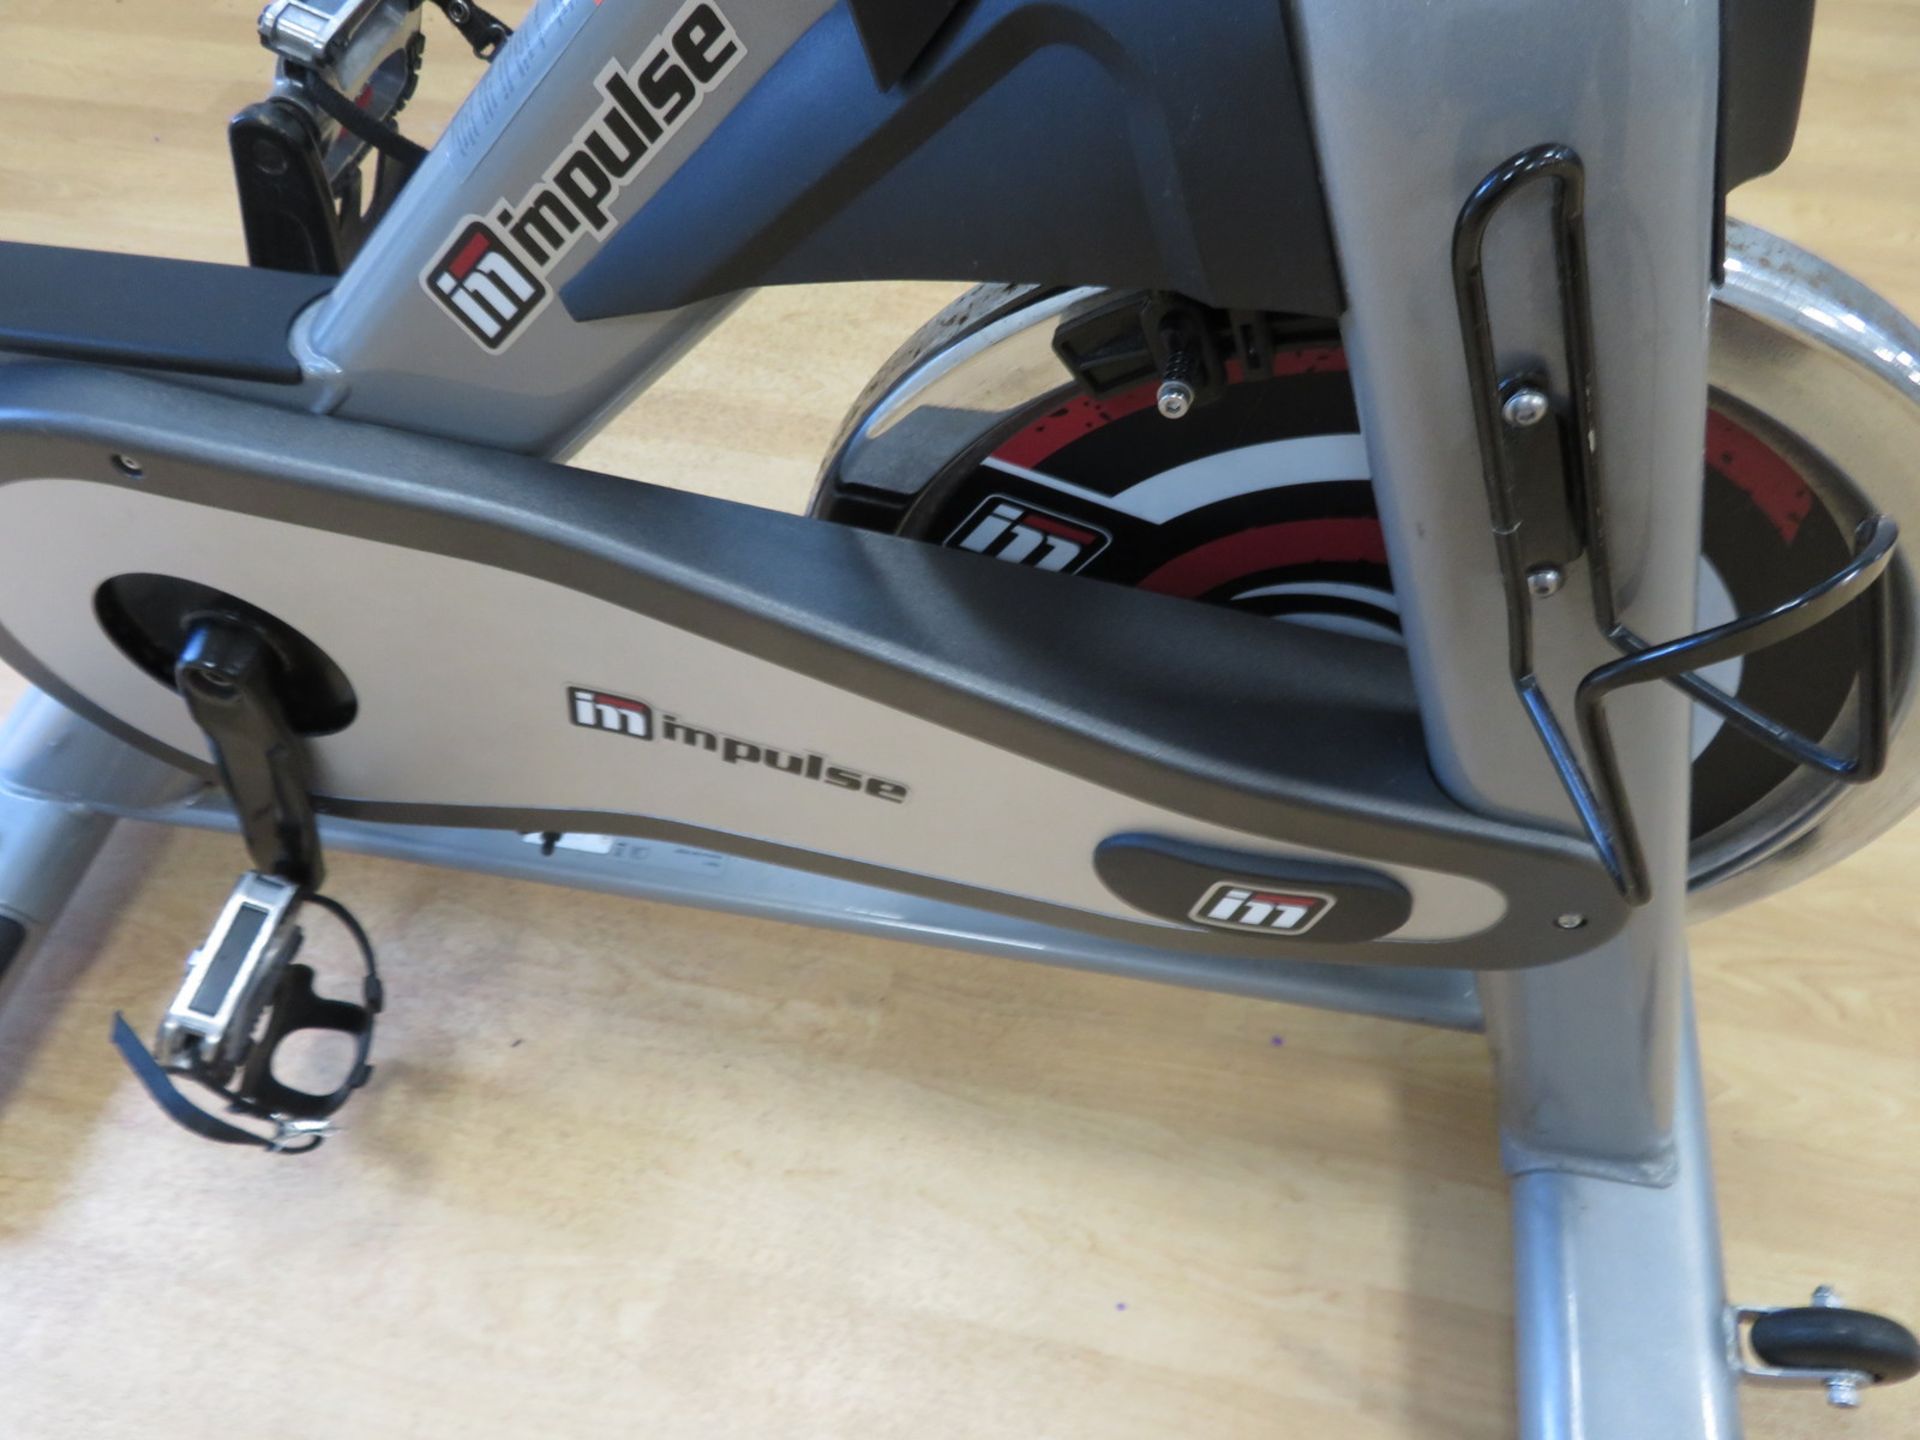 Impulse Model: PS300D Spin Bike With Digital Console. Adjustable Seat & Handle Bars. - Image 5 of 11